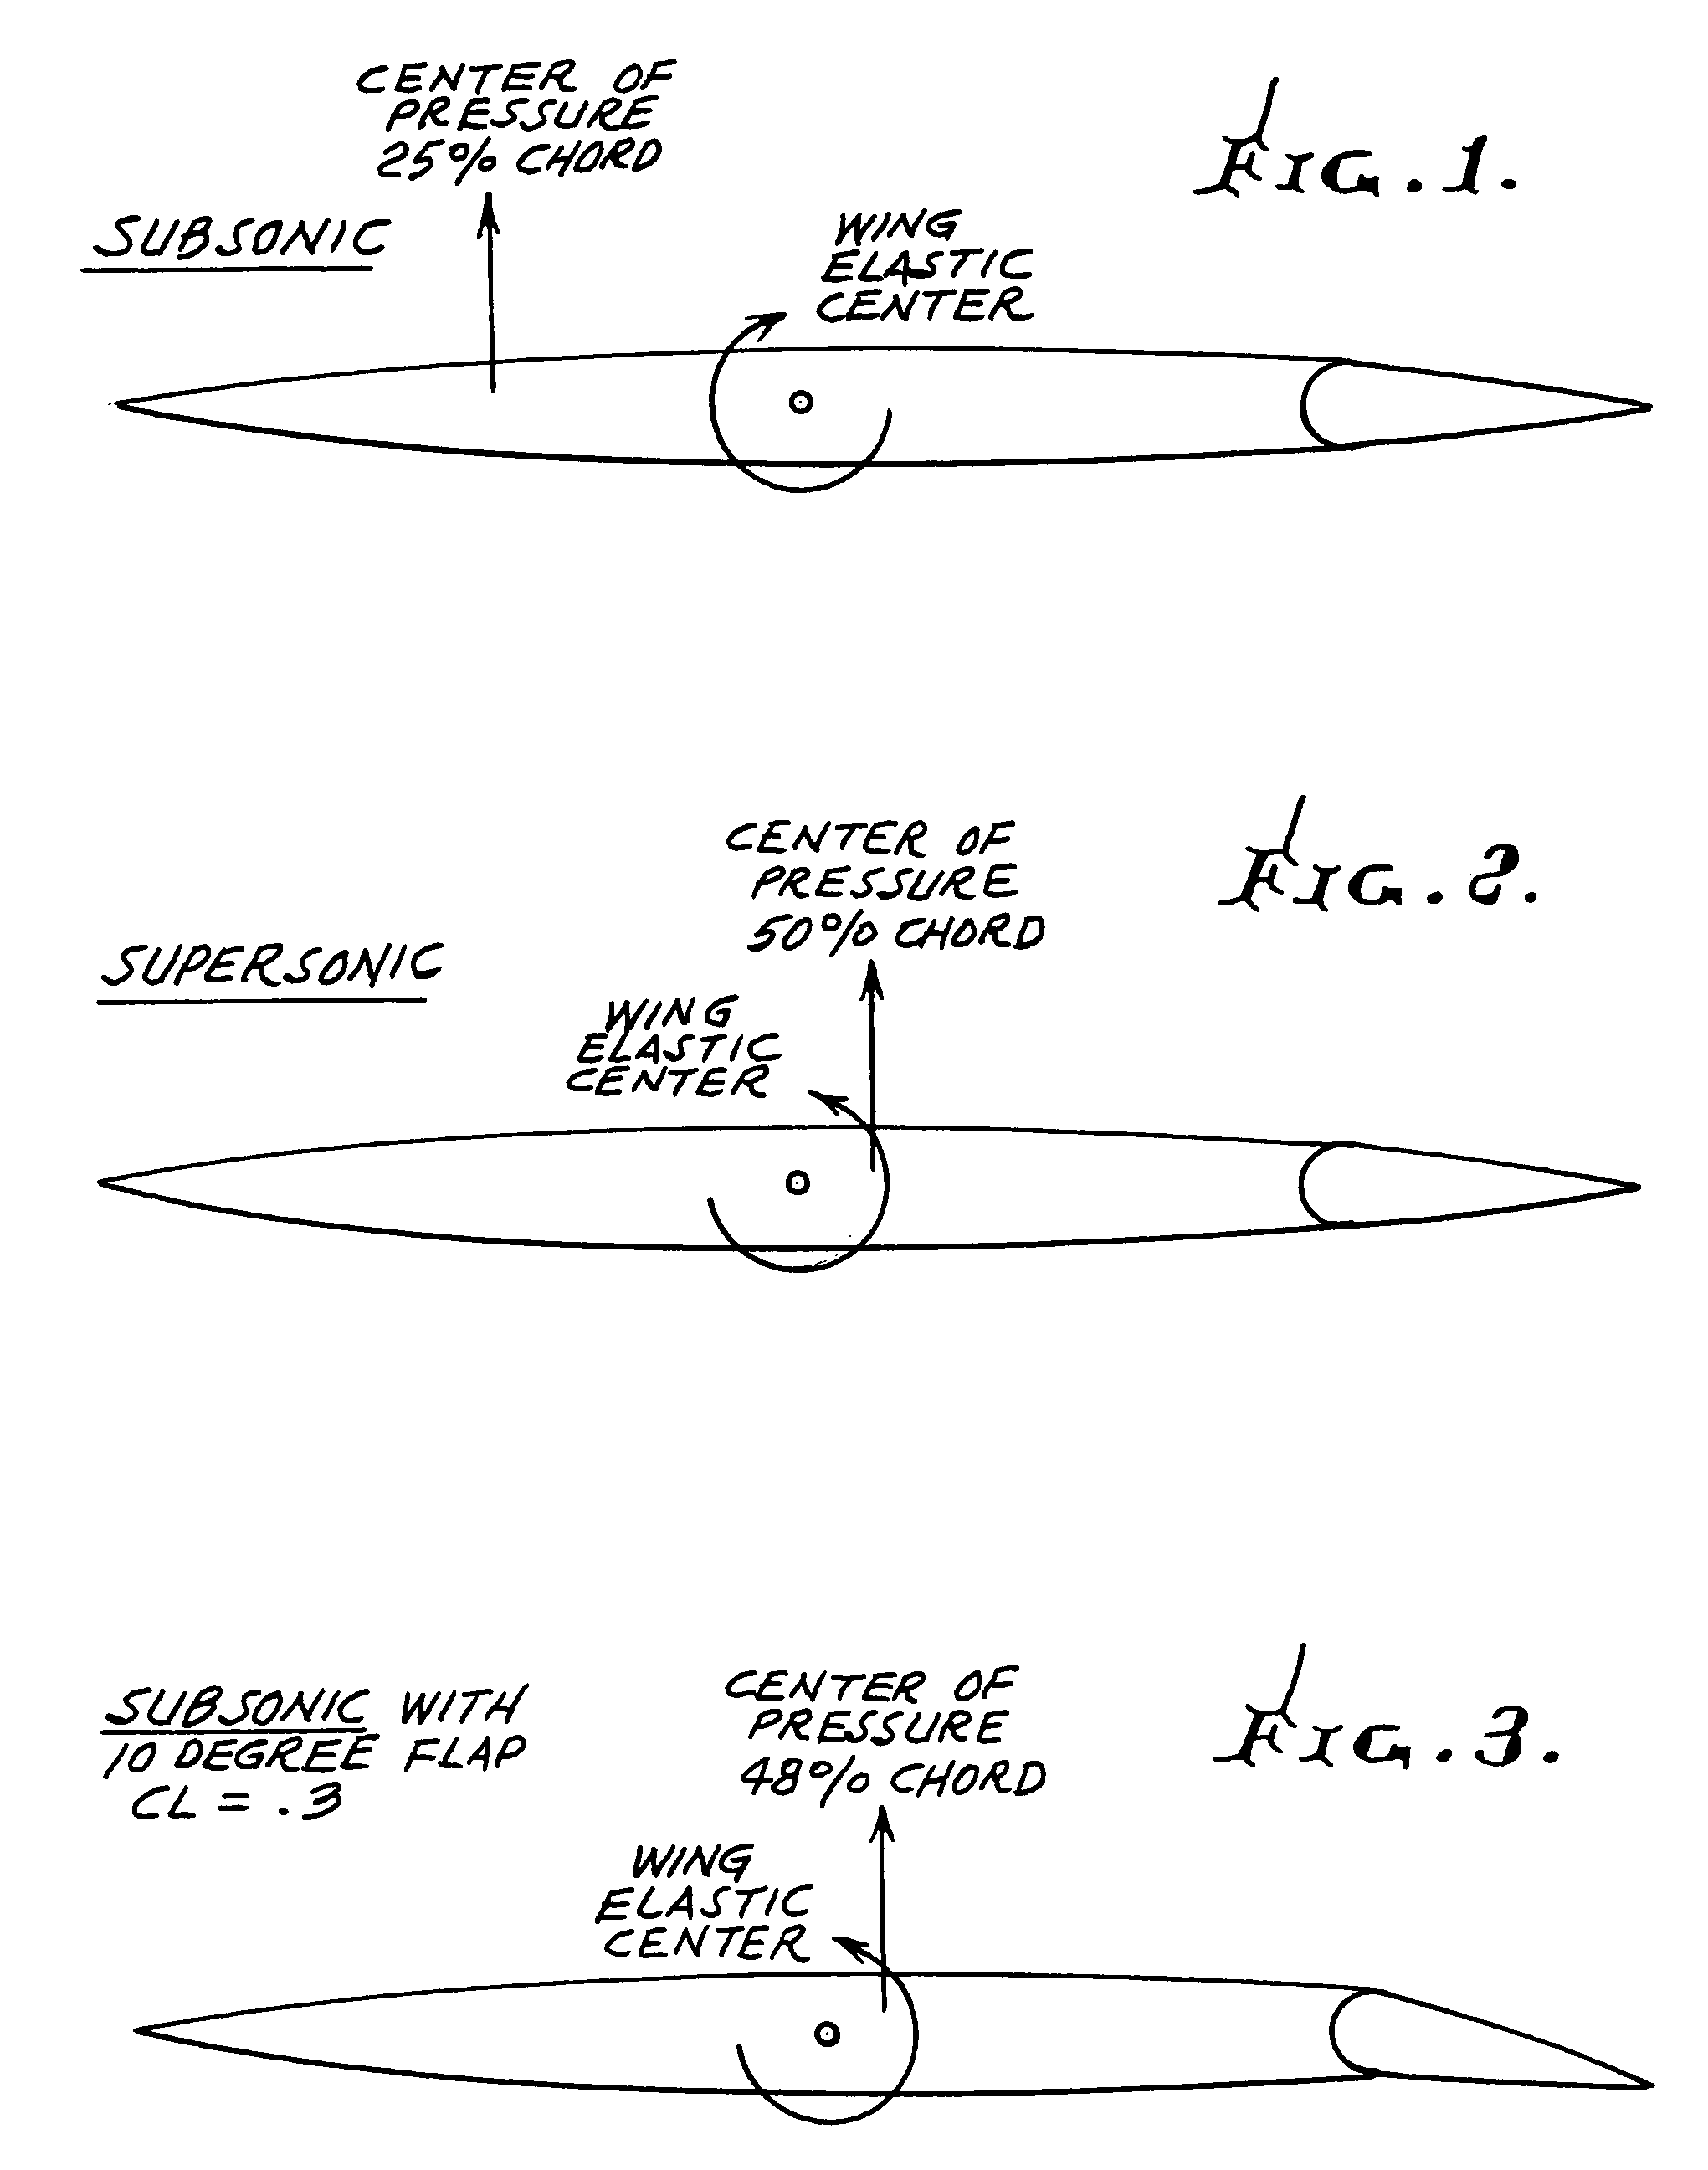 Lift and twist control using trailing edge control surfaces on supersonic laminar flow wings